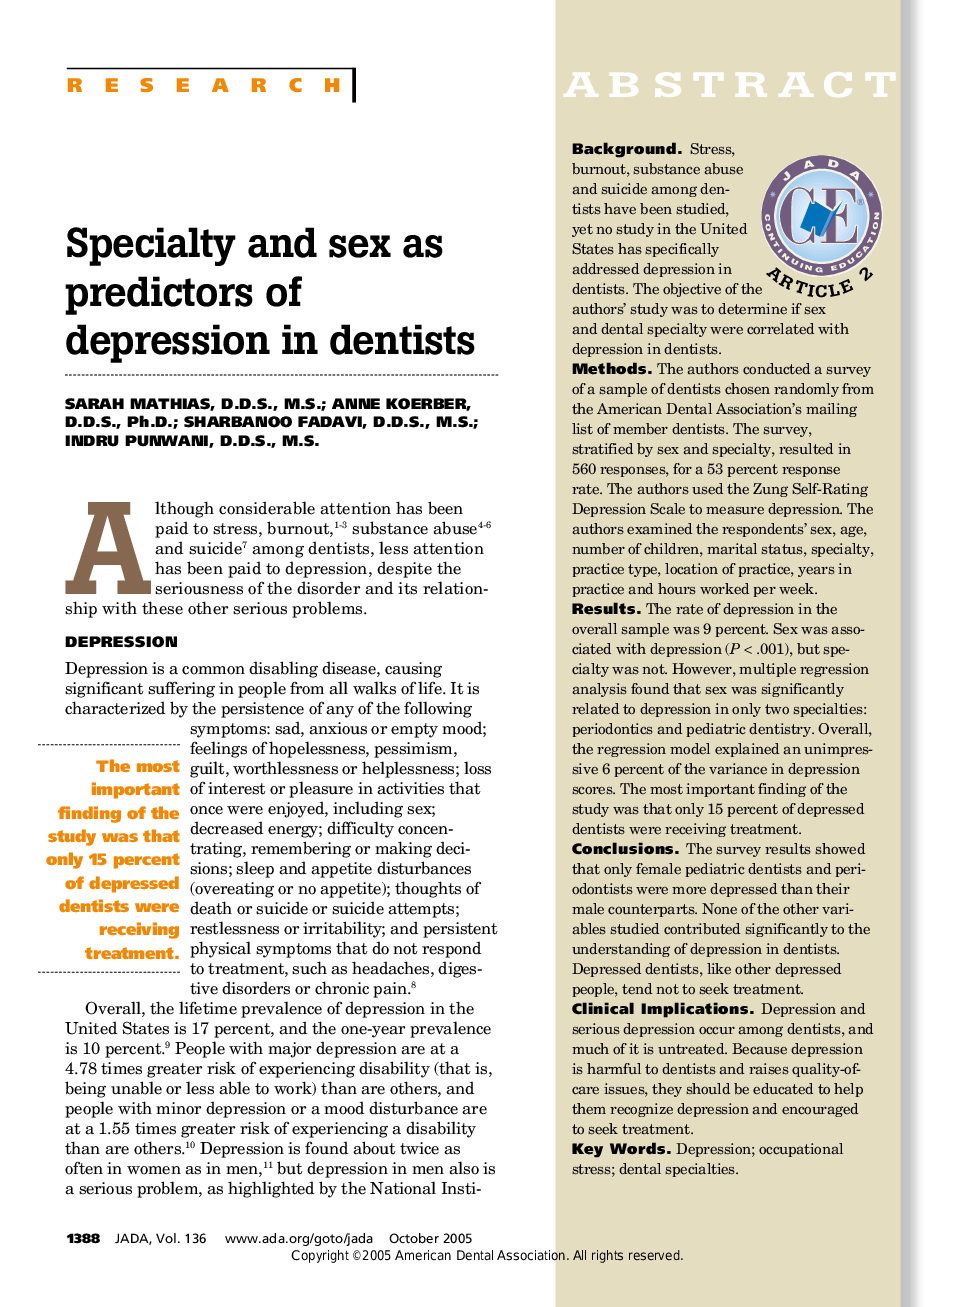 Specialty and sex as predictors of depression in dentists